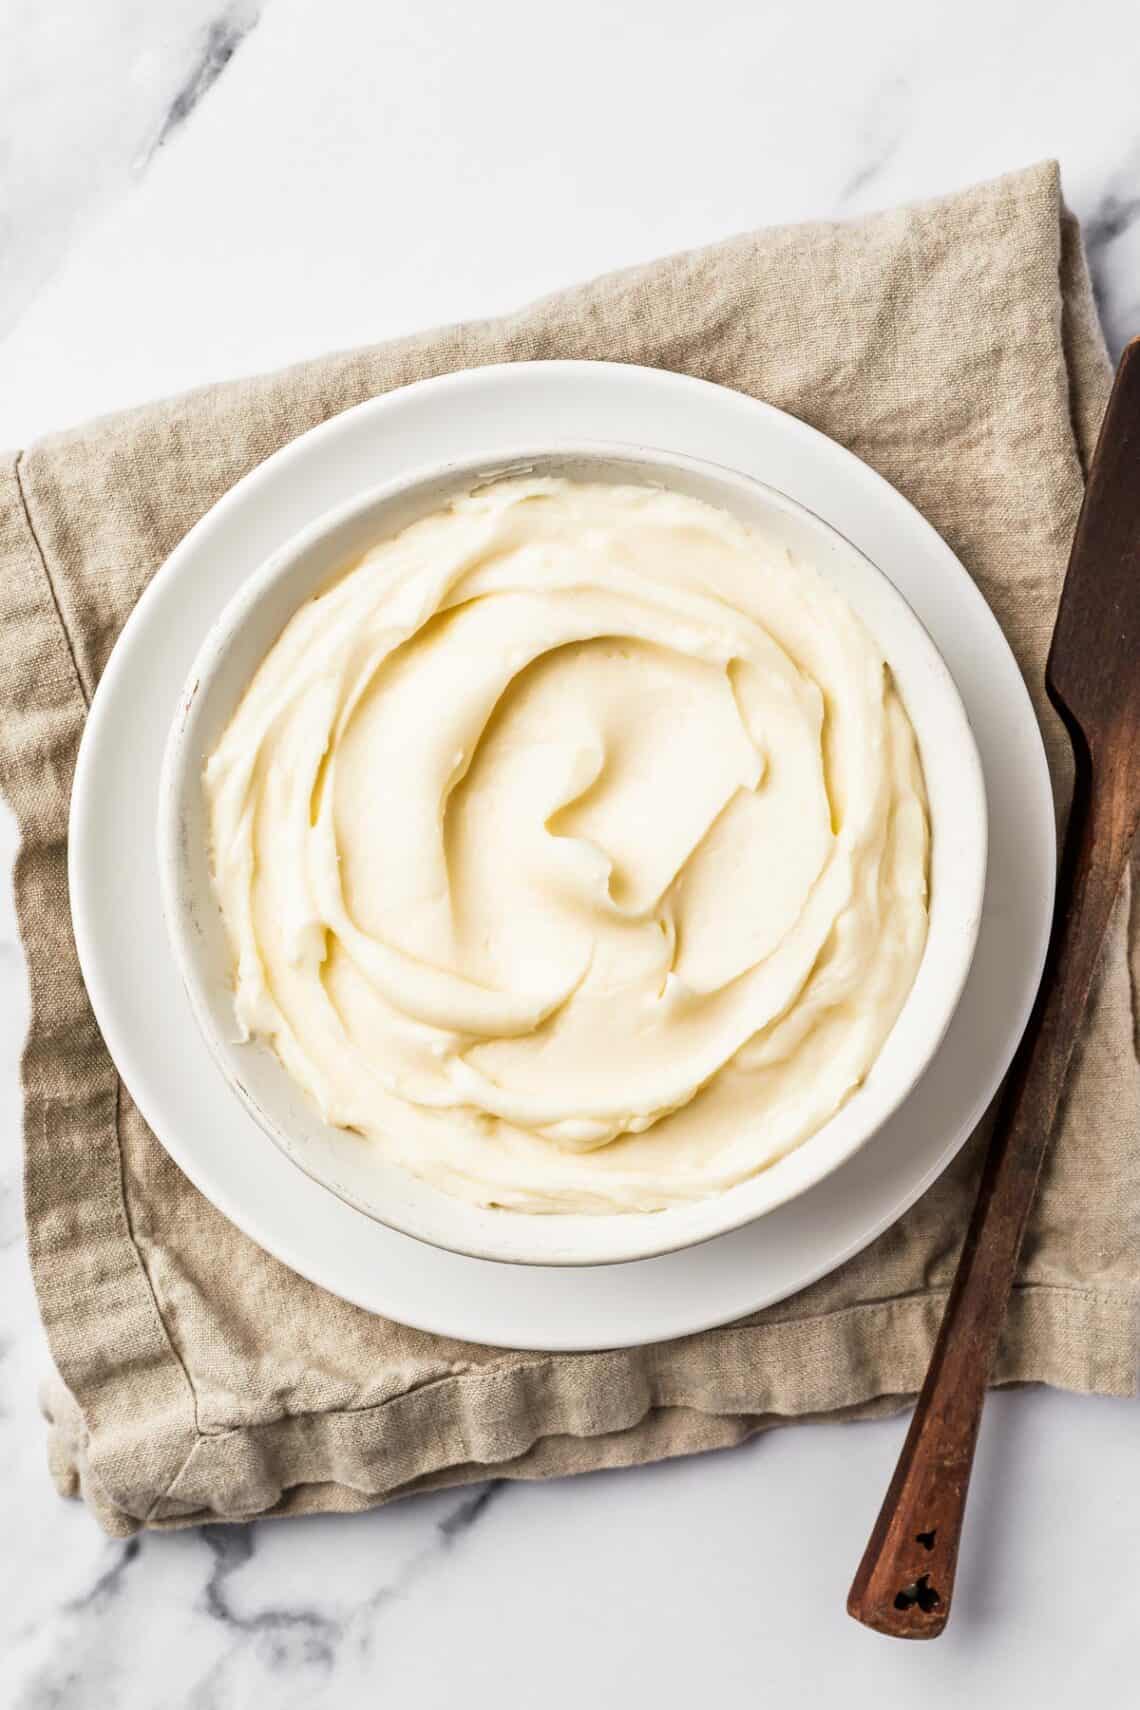 A bowl of creamy white icing on a linen napkin.